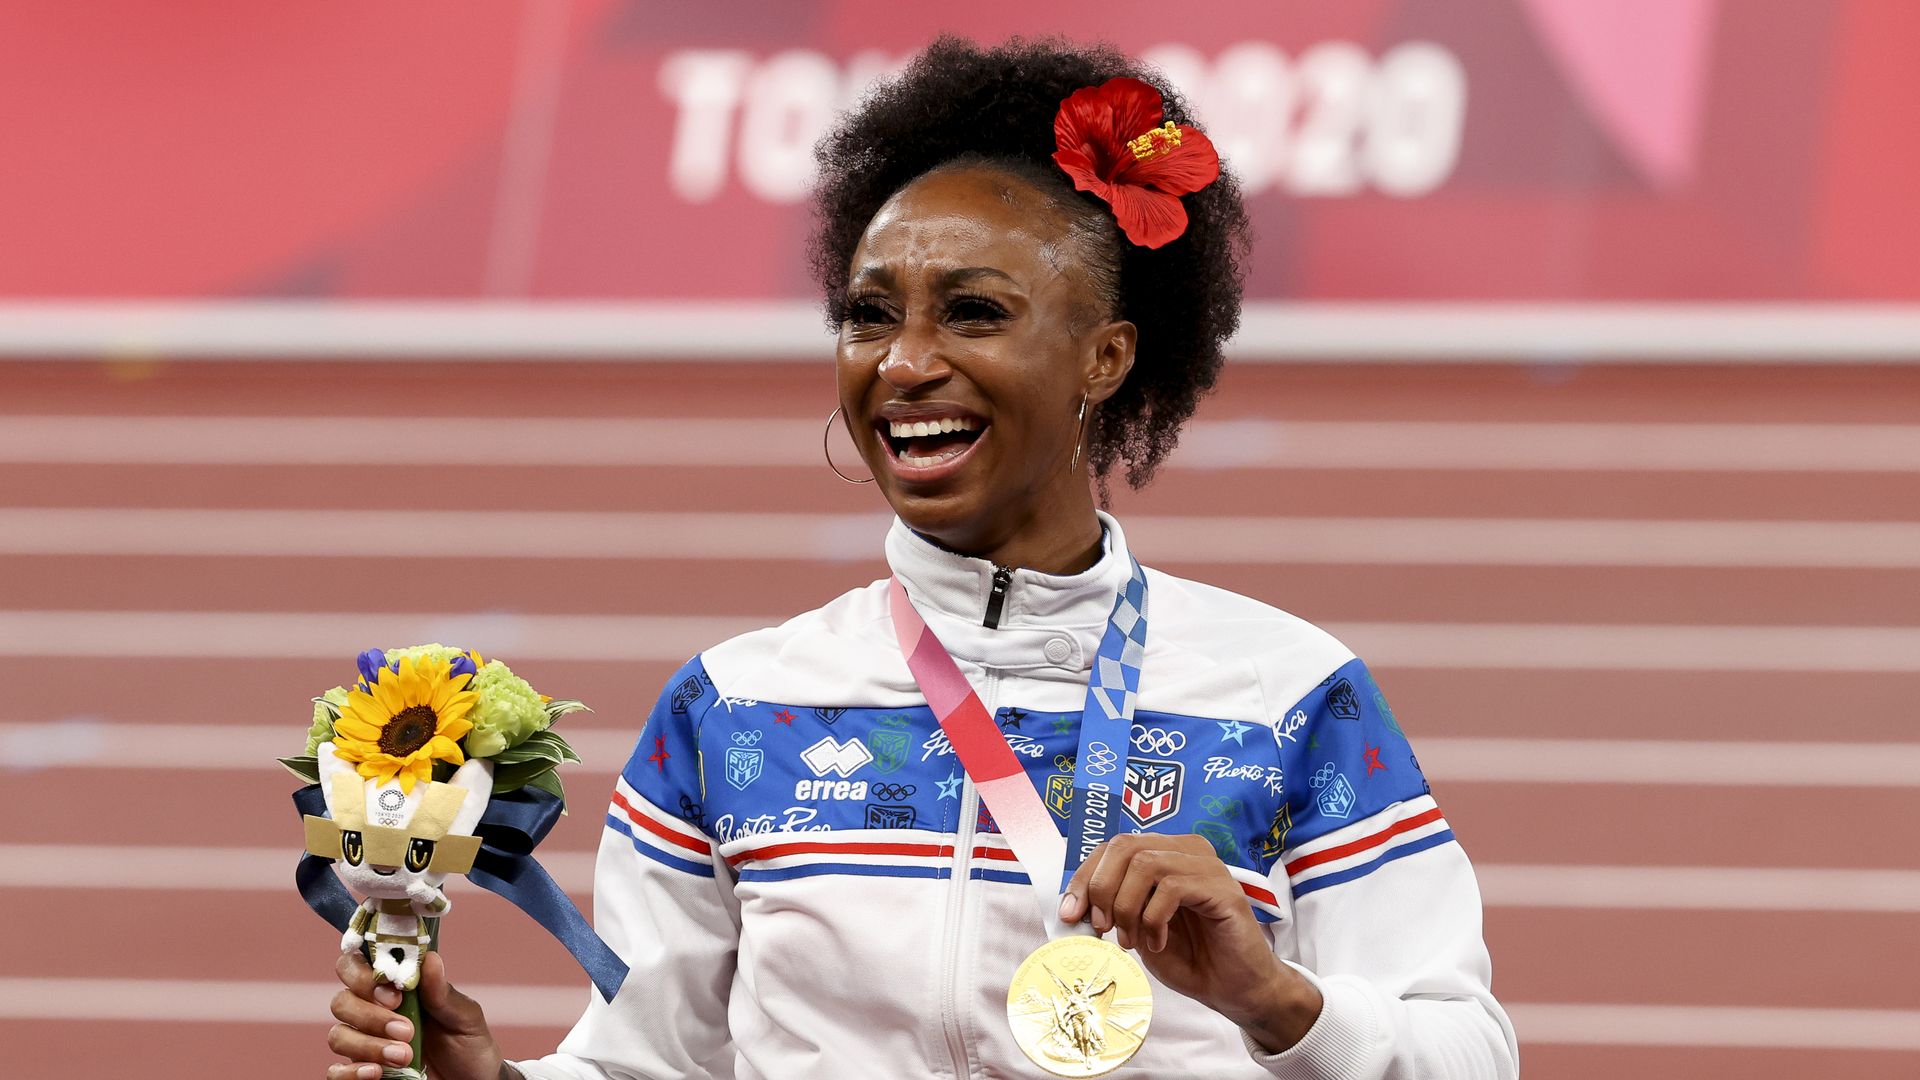 Gold Medalist Jasmine Camacho-Quinn of Puerto Rico during the medal ceremony of the Women's 100m Hurdles on day ten of the athletics events of the Tokyo 2020 Olympic Games